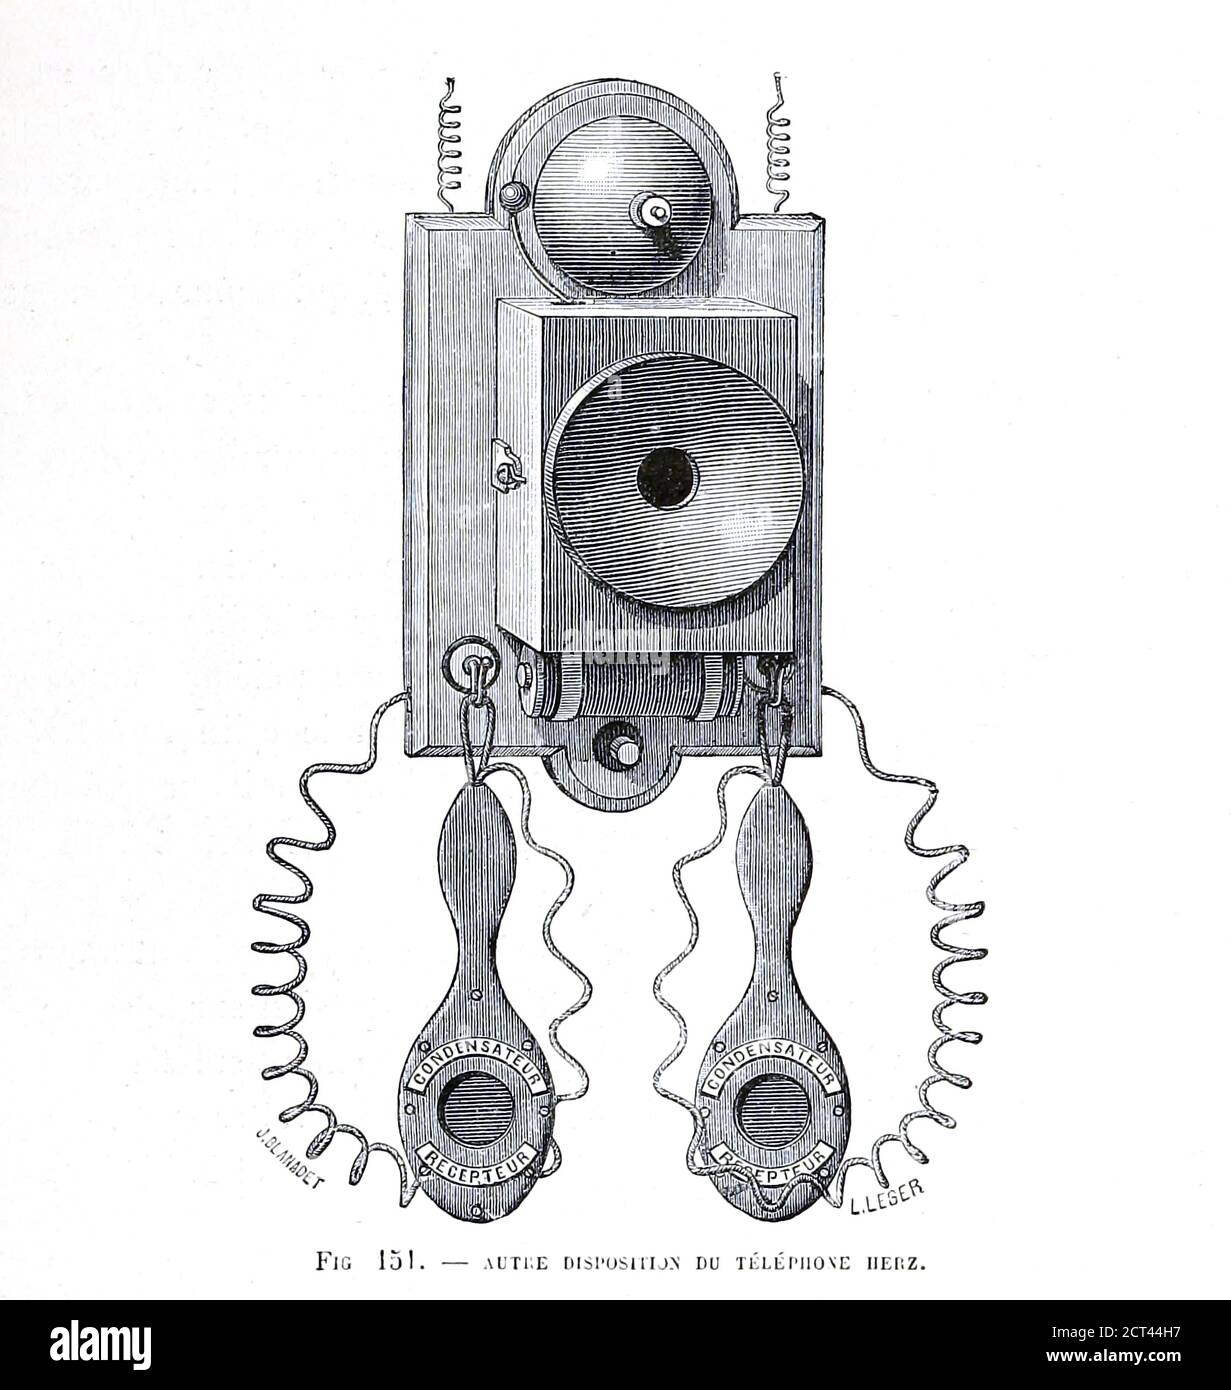 late 19th century inventions